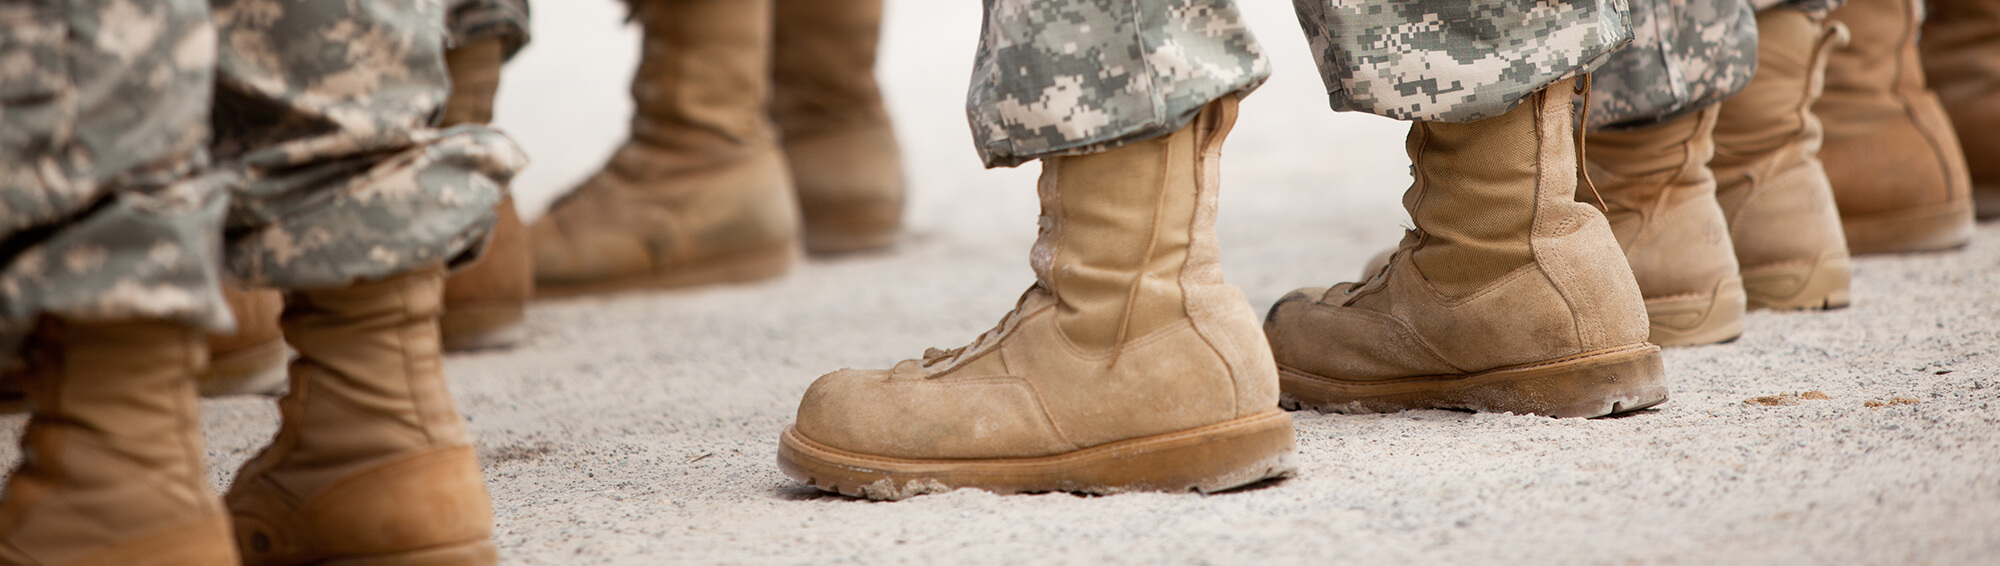 What Are the Requirements to Receive Veterans Disability Benefits?